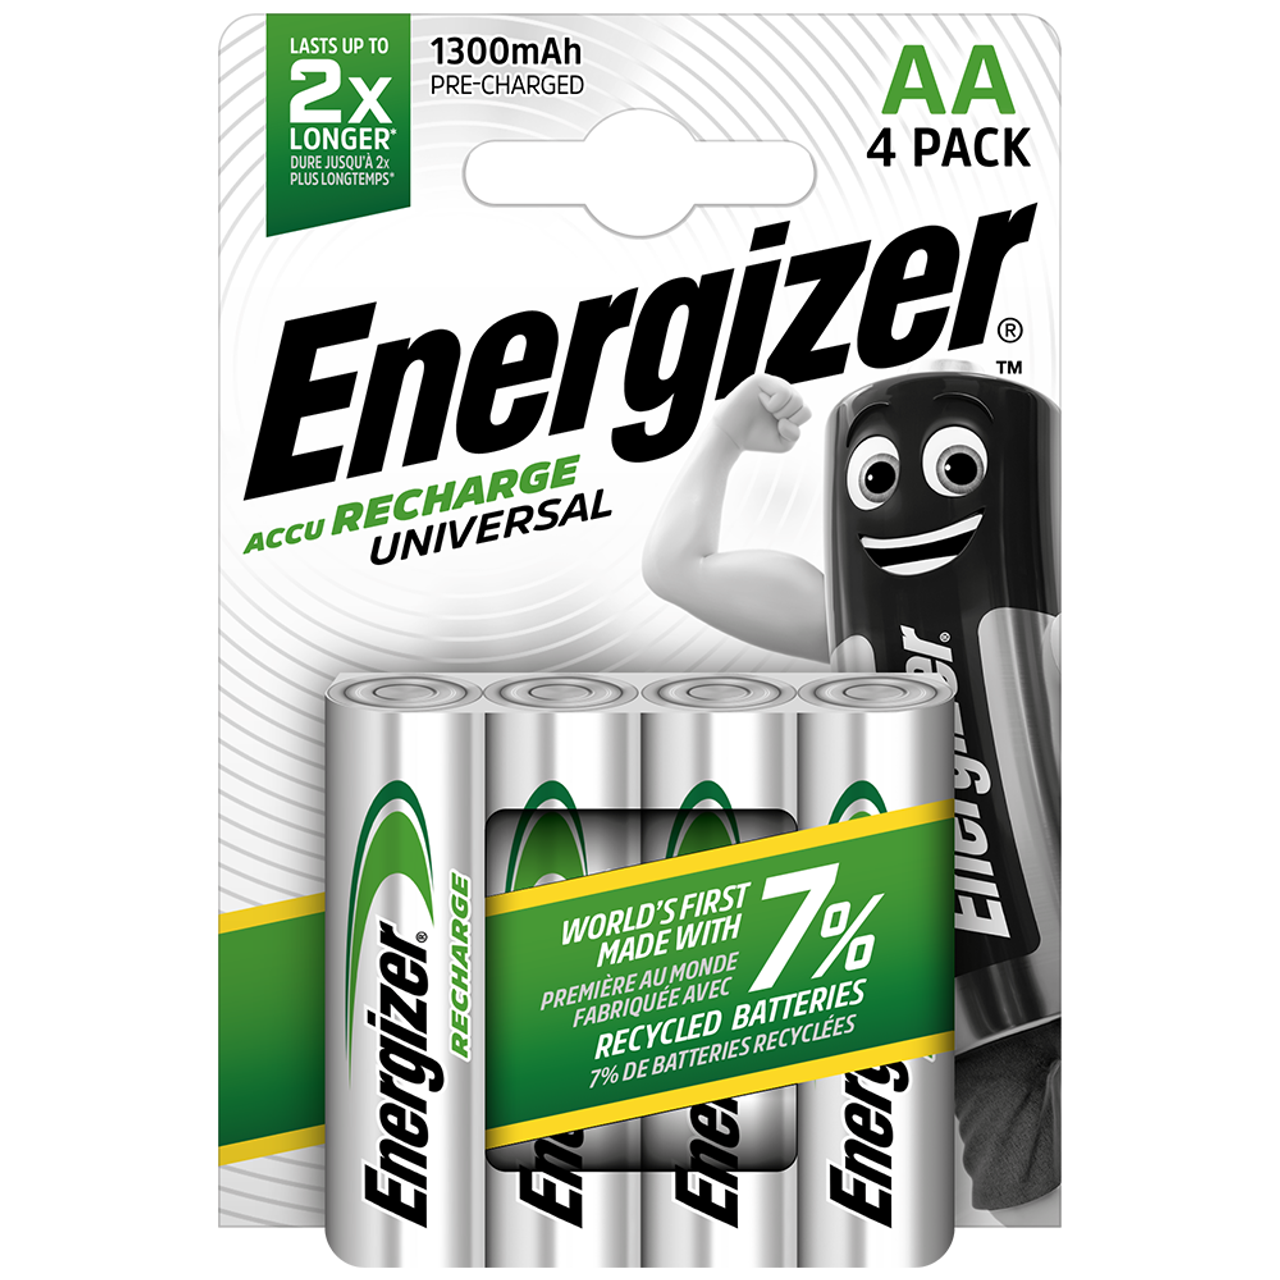 Energizer Universal 1300mAh Rechargeable AA Batteries - 4 Pack